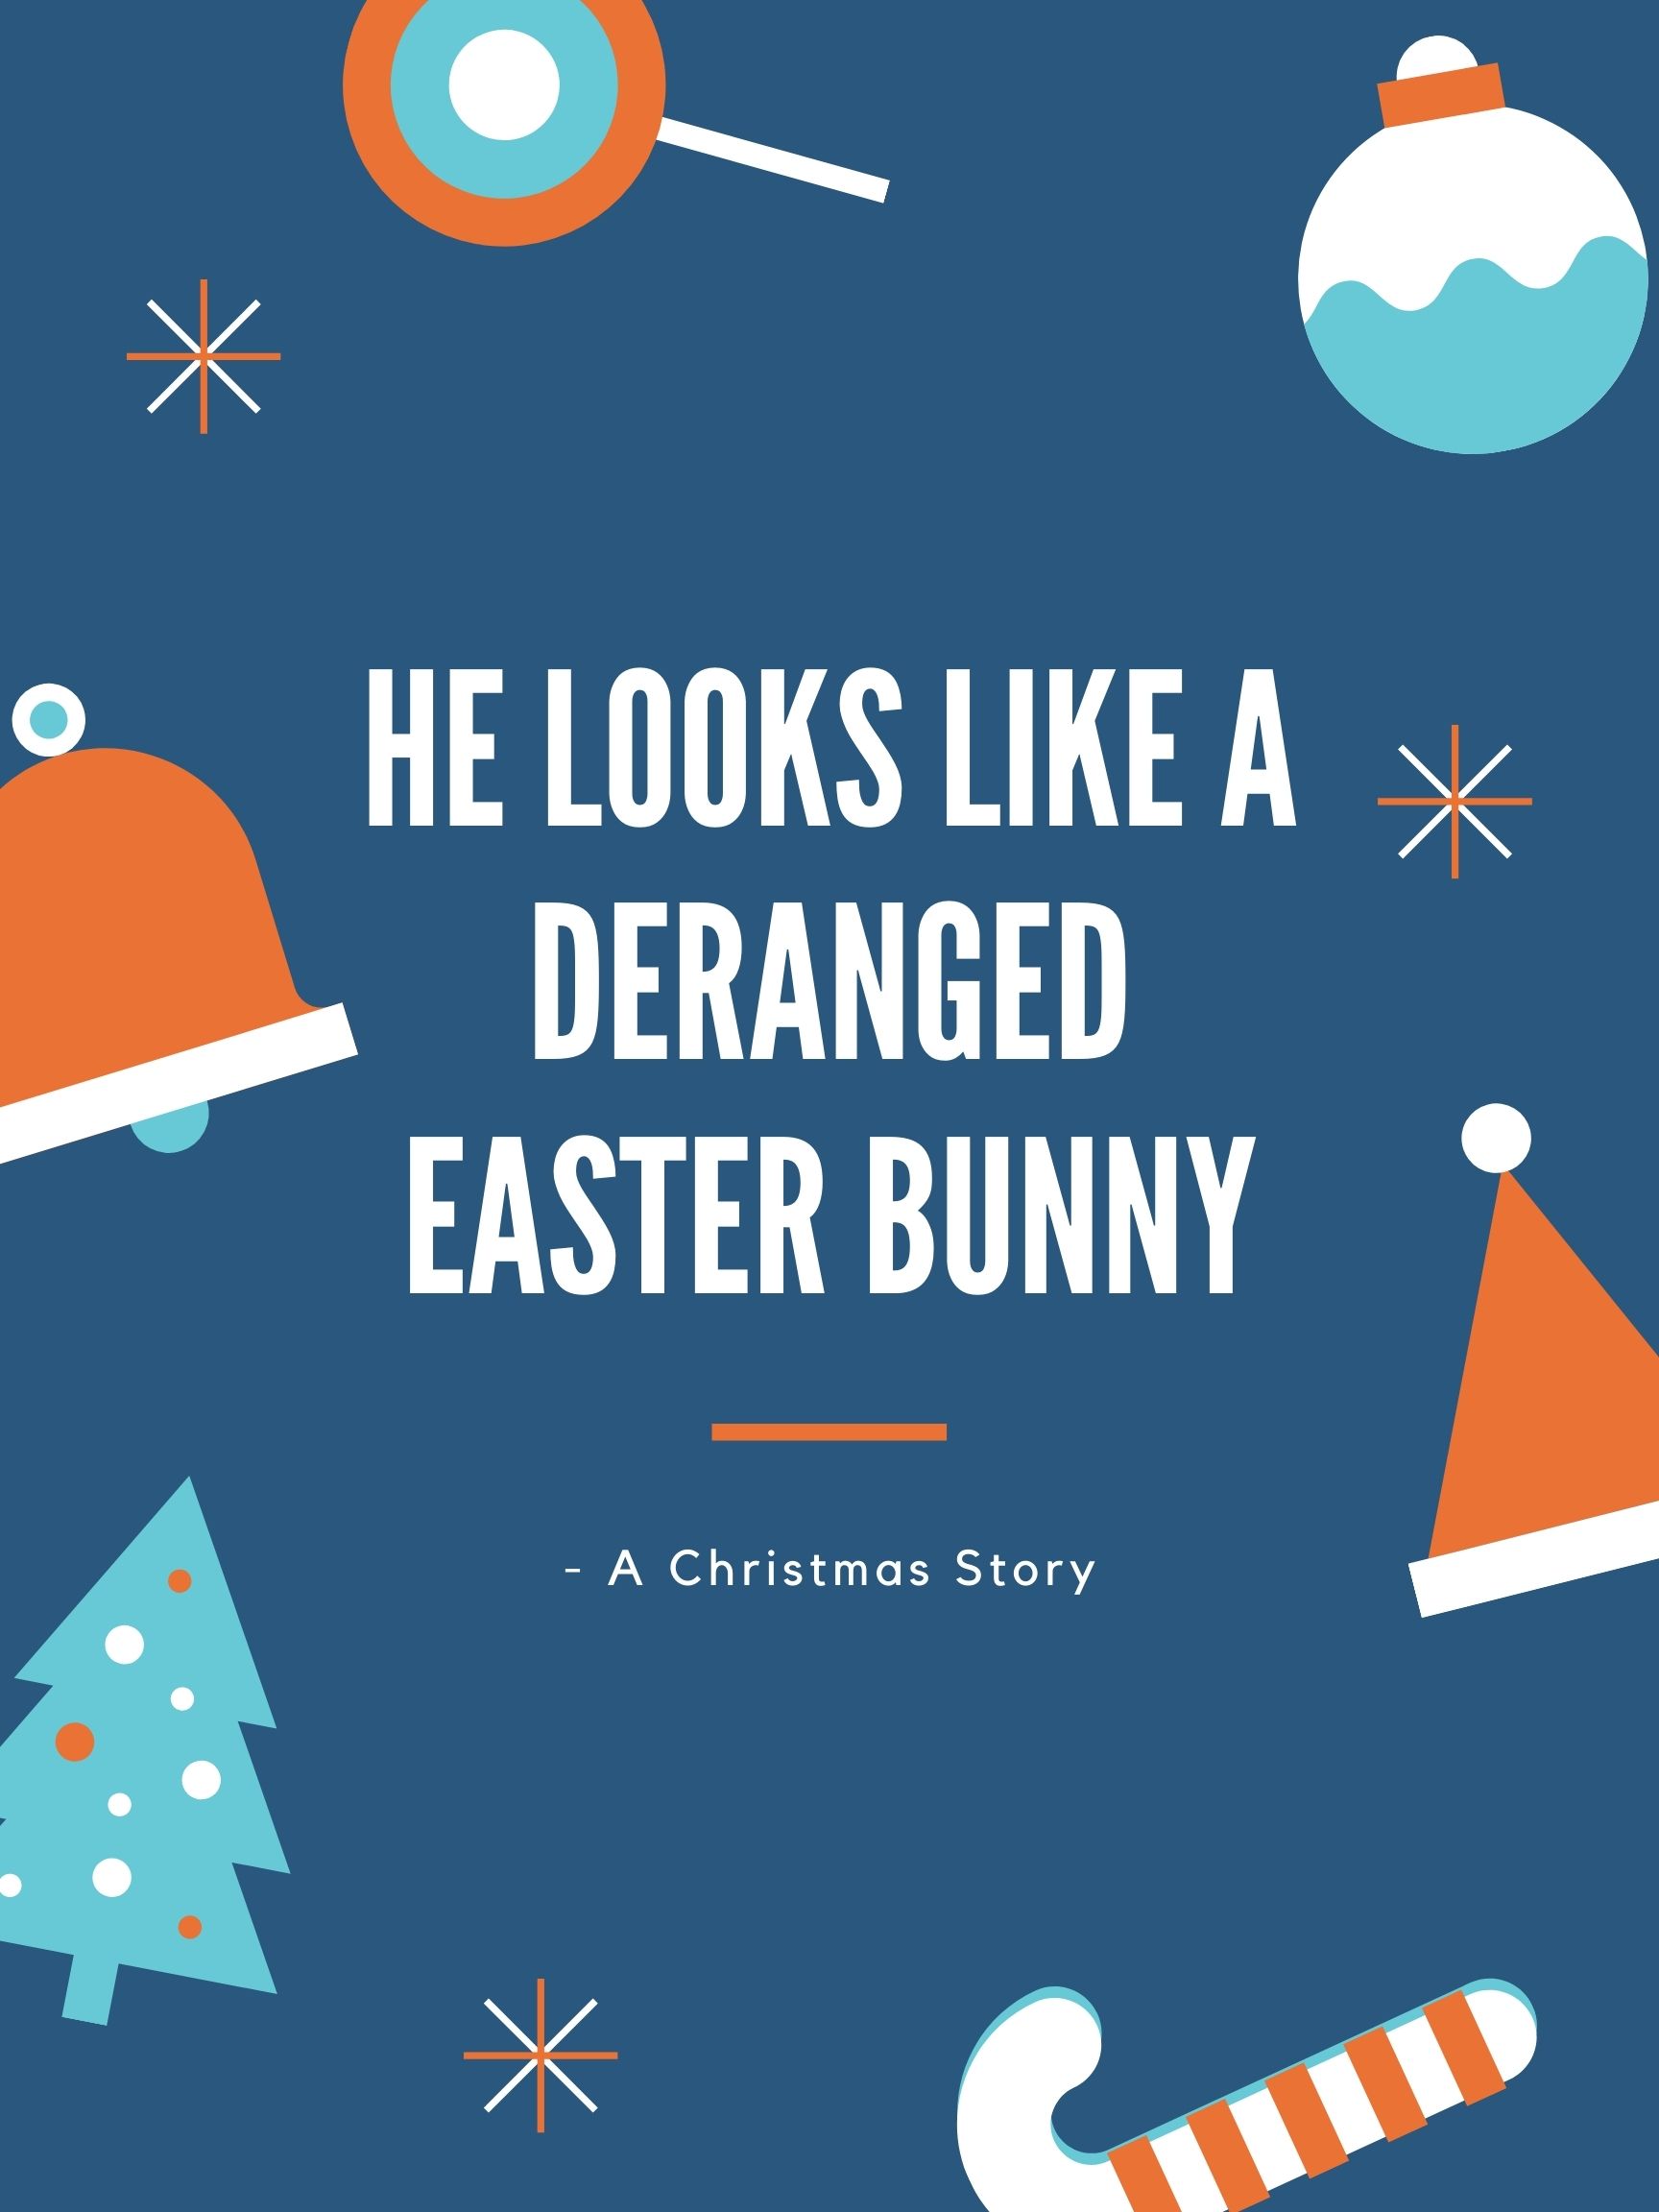 Funny Christmas Movie Quotes - He Looks Like a Deranged Easter Bunny A Christmas Story